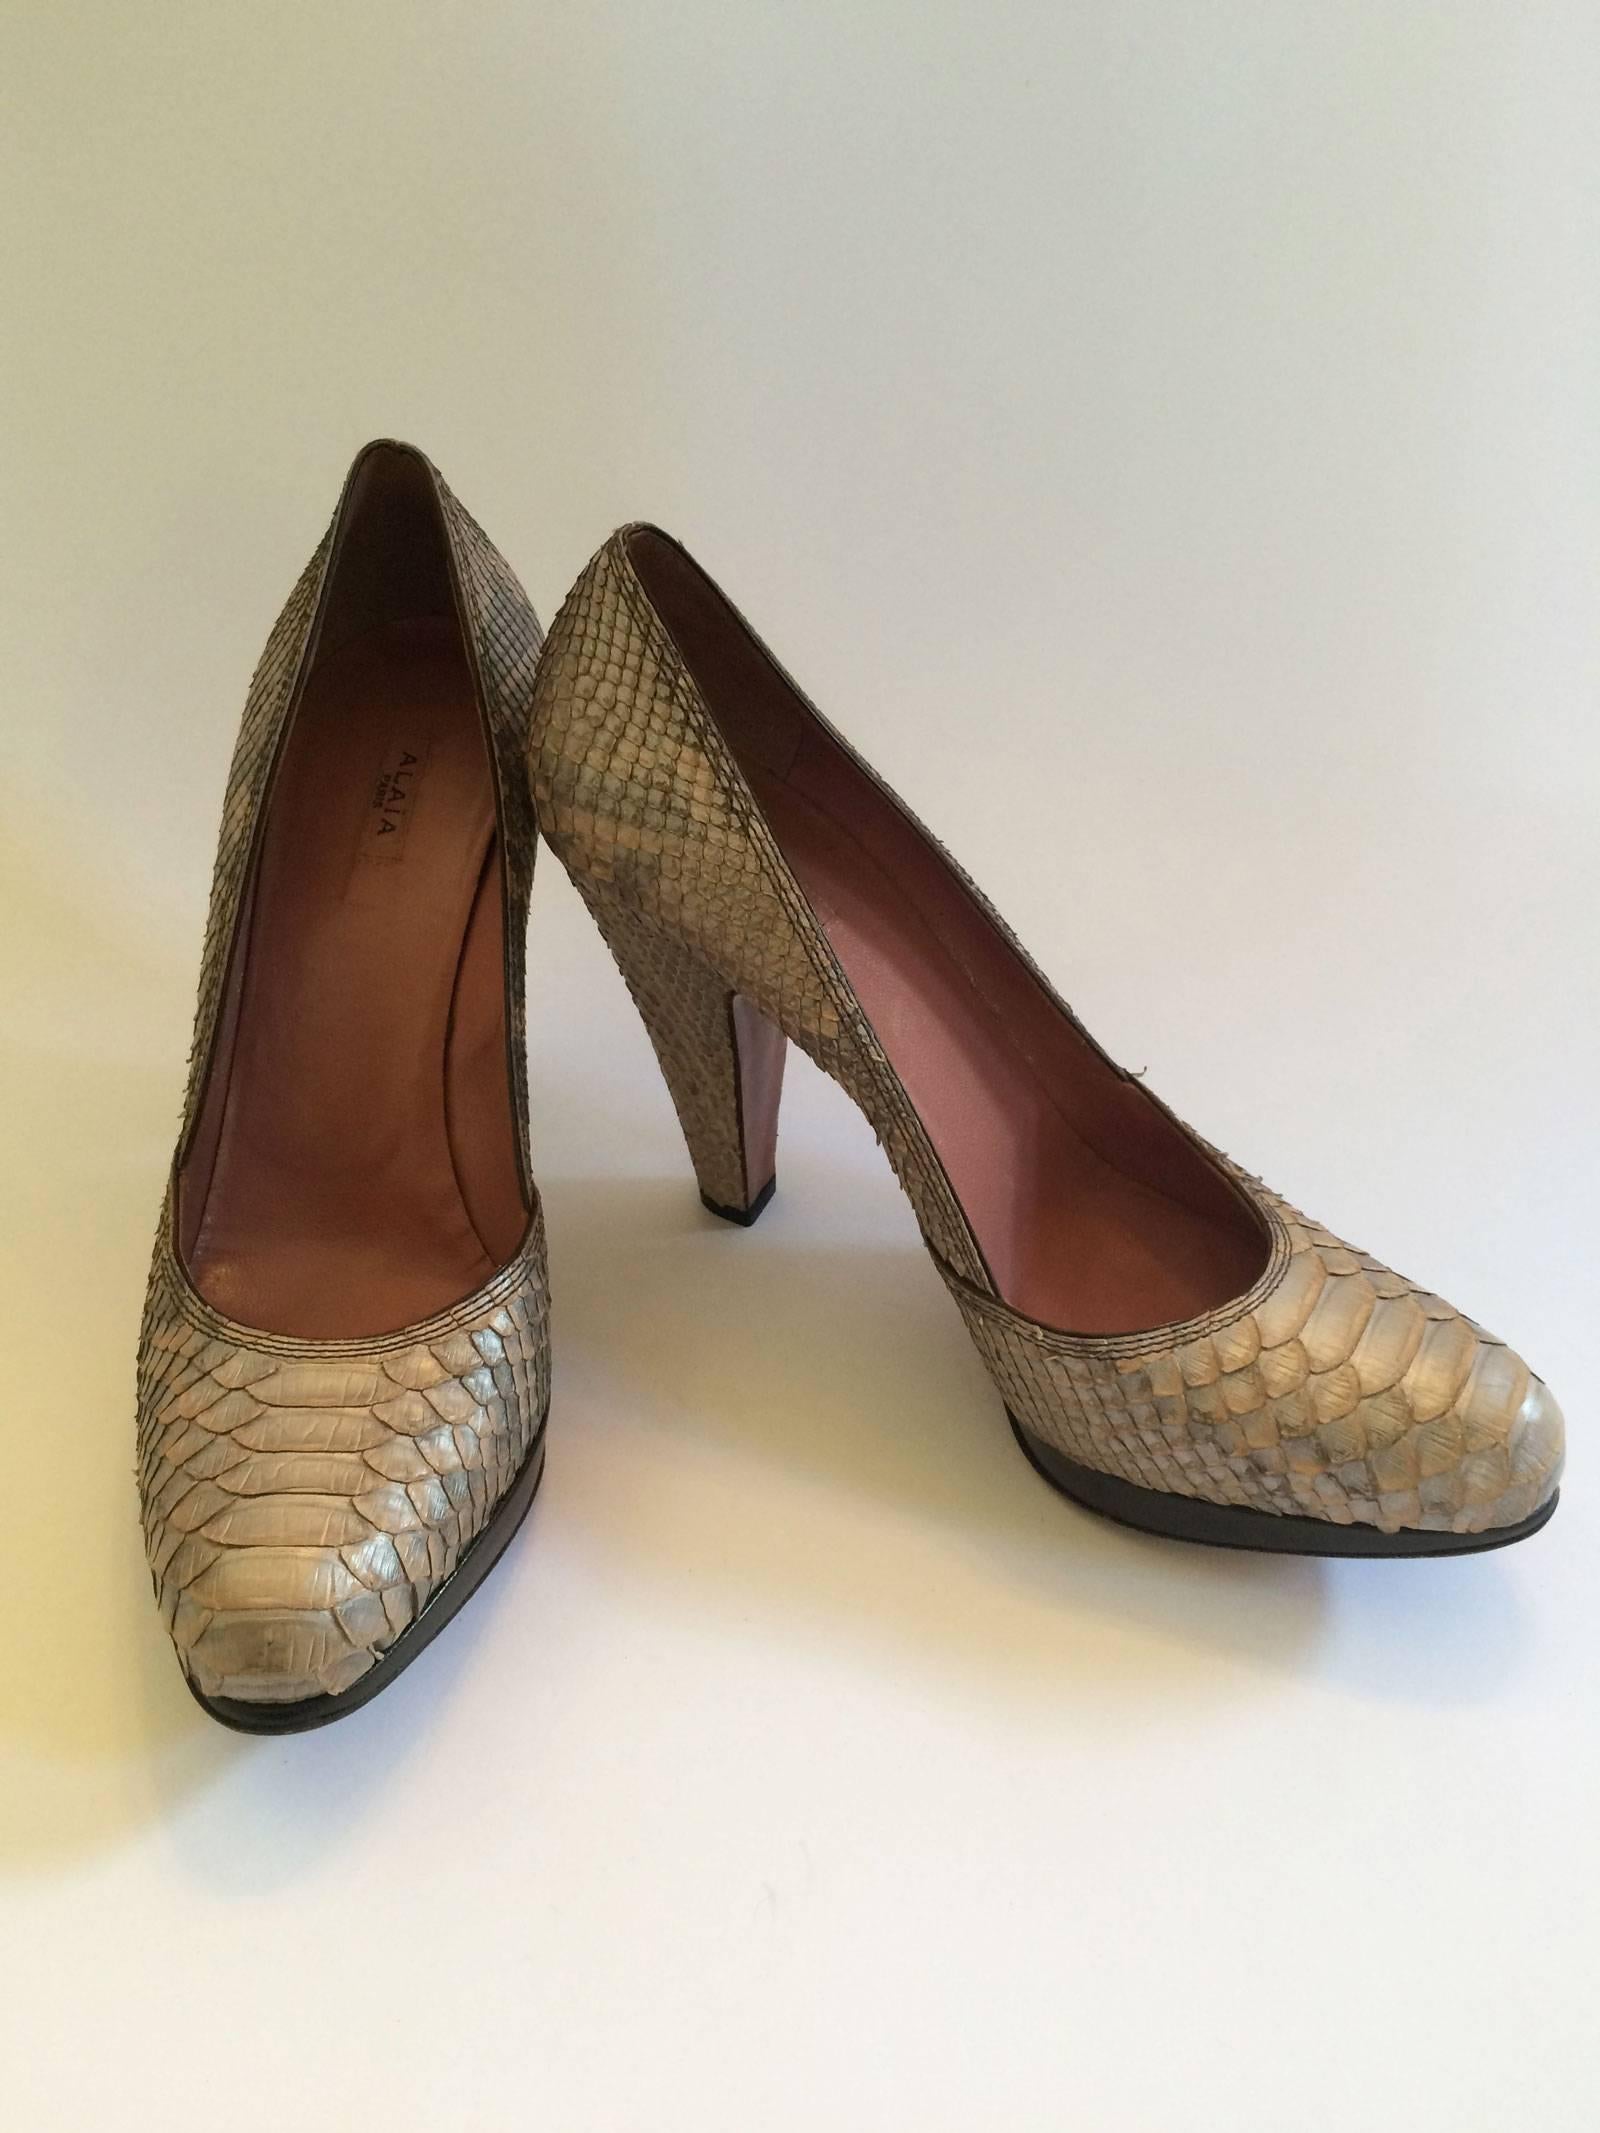 Stunning Azzedine Alaia snakeskin heels.
Slightly iridescent.
Shades of pale gray, beige and taupe.
Almond shaped toe.
Dark brown leather 3/4